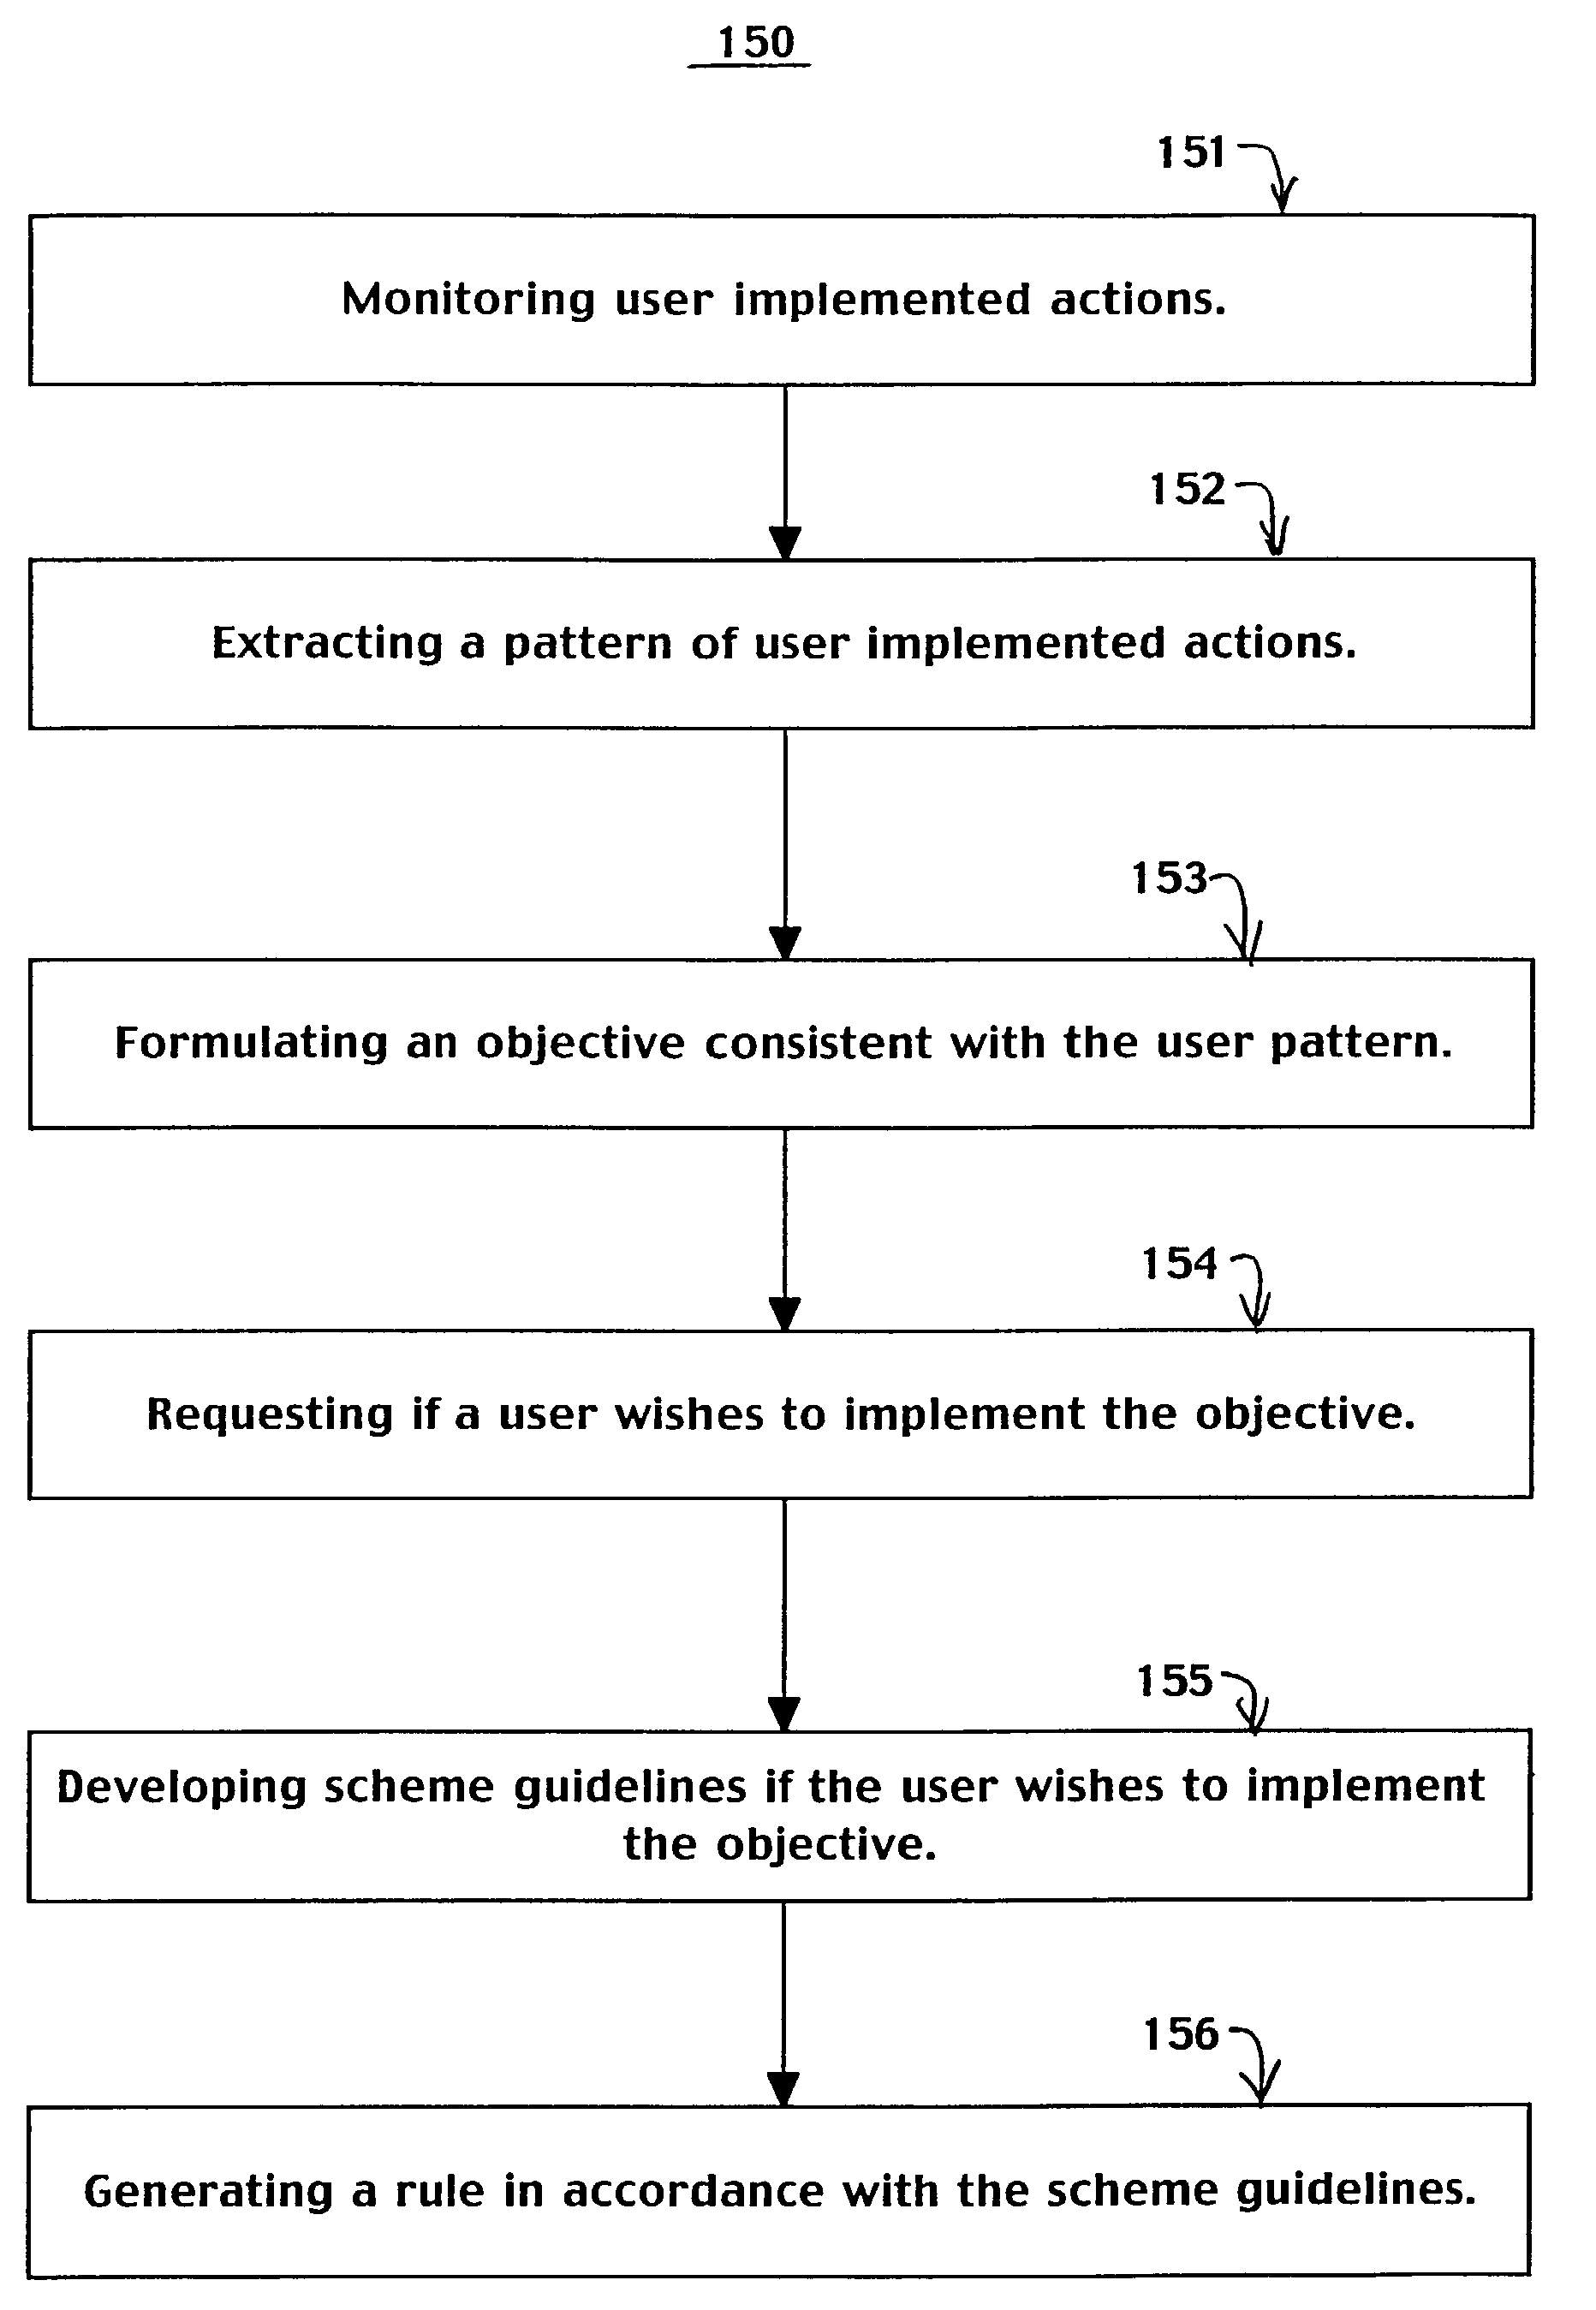 Computer implemented system and method for predictive management of electronic messages